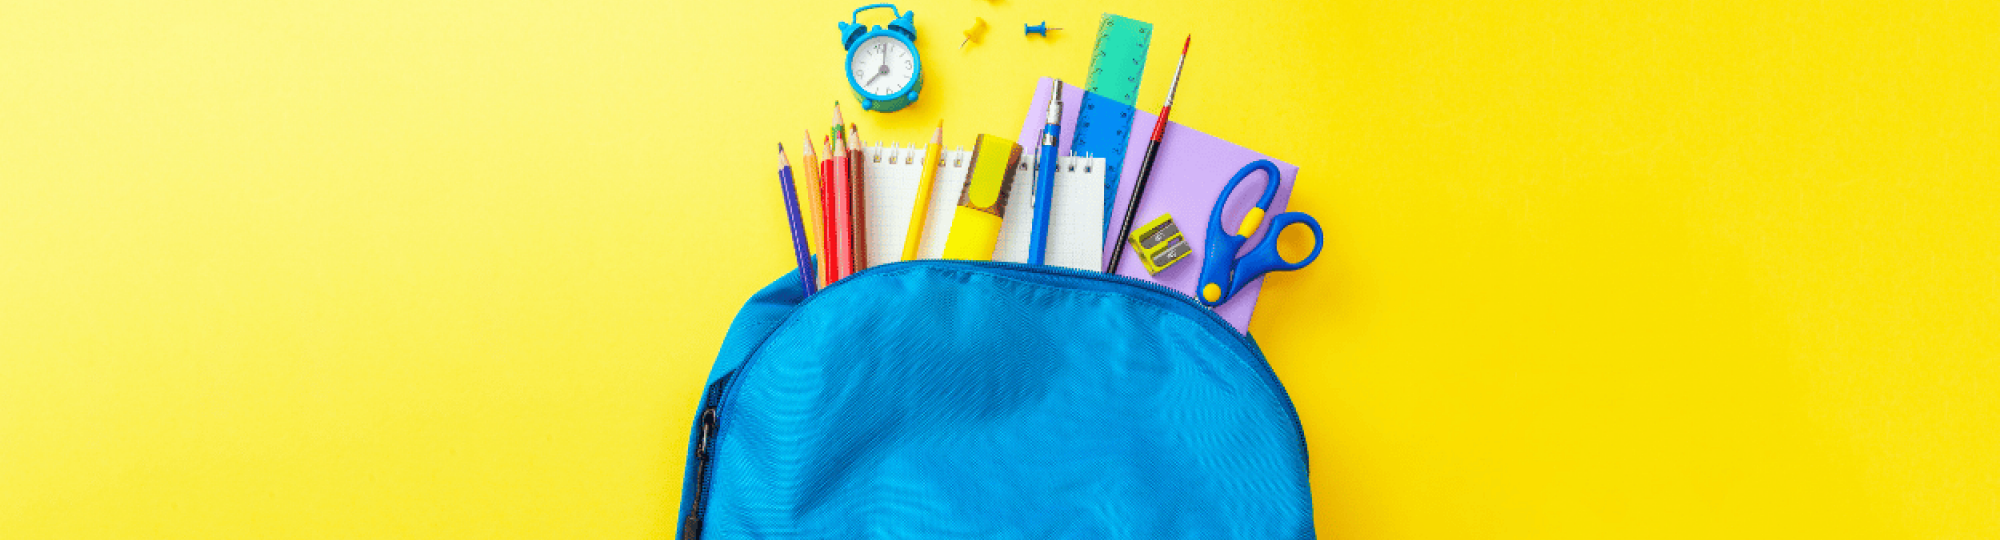 Blue Backpack spilling over with school supplies over a yellow background